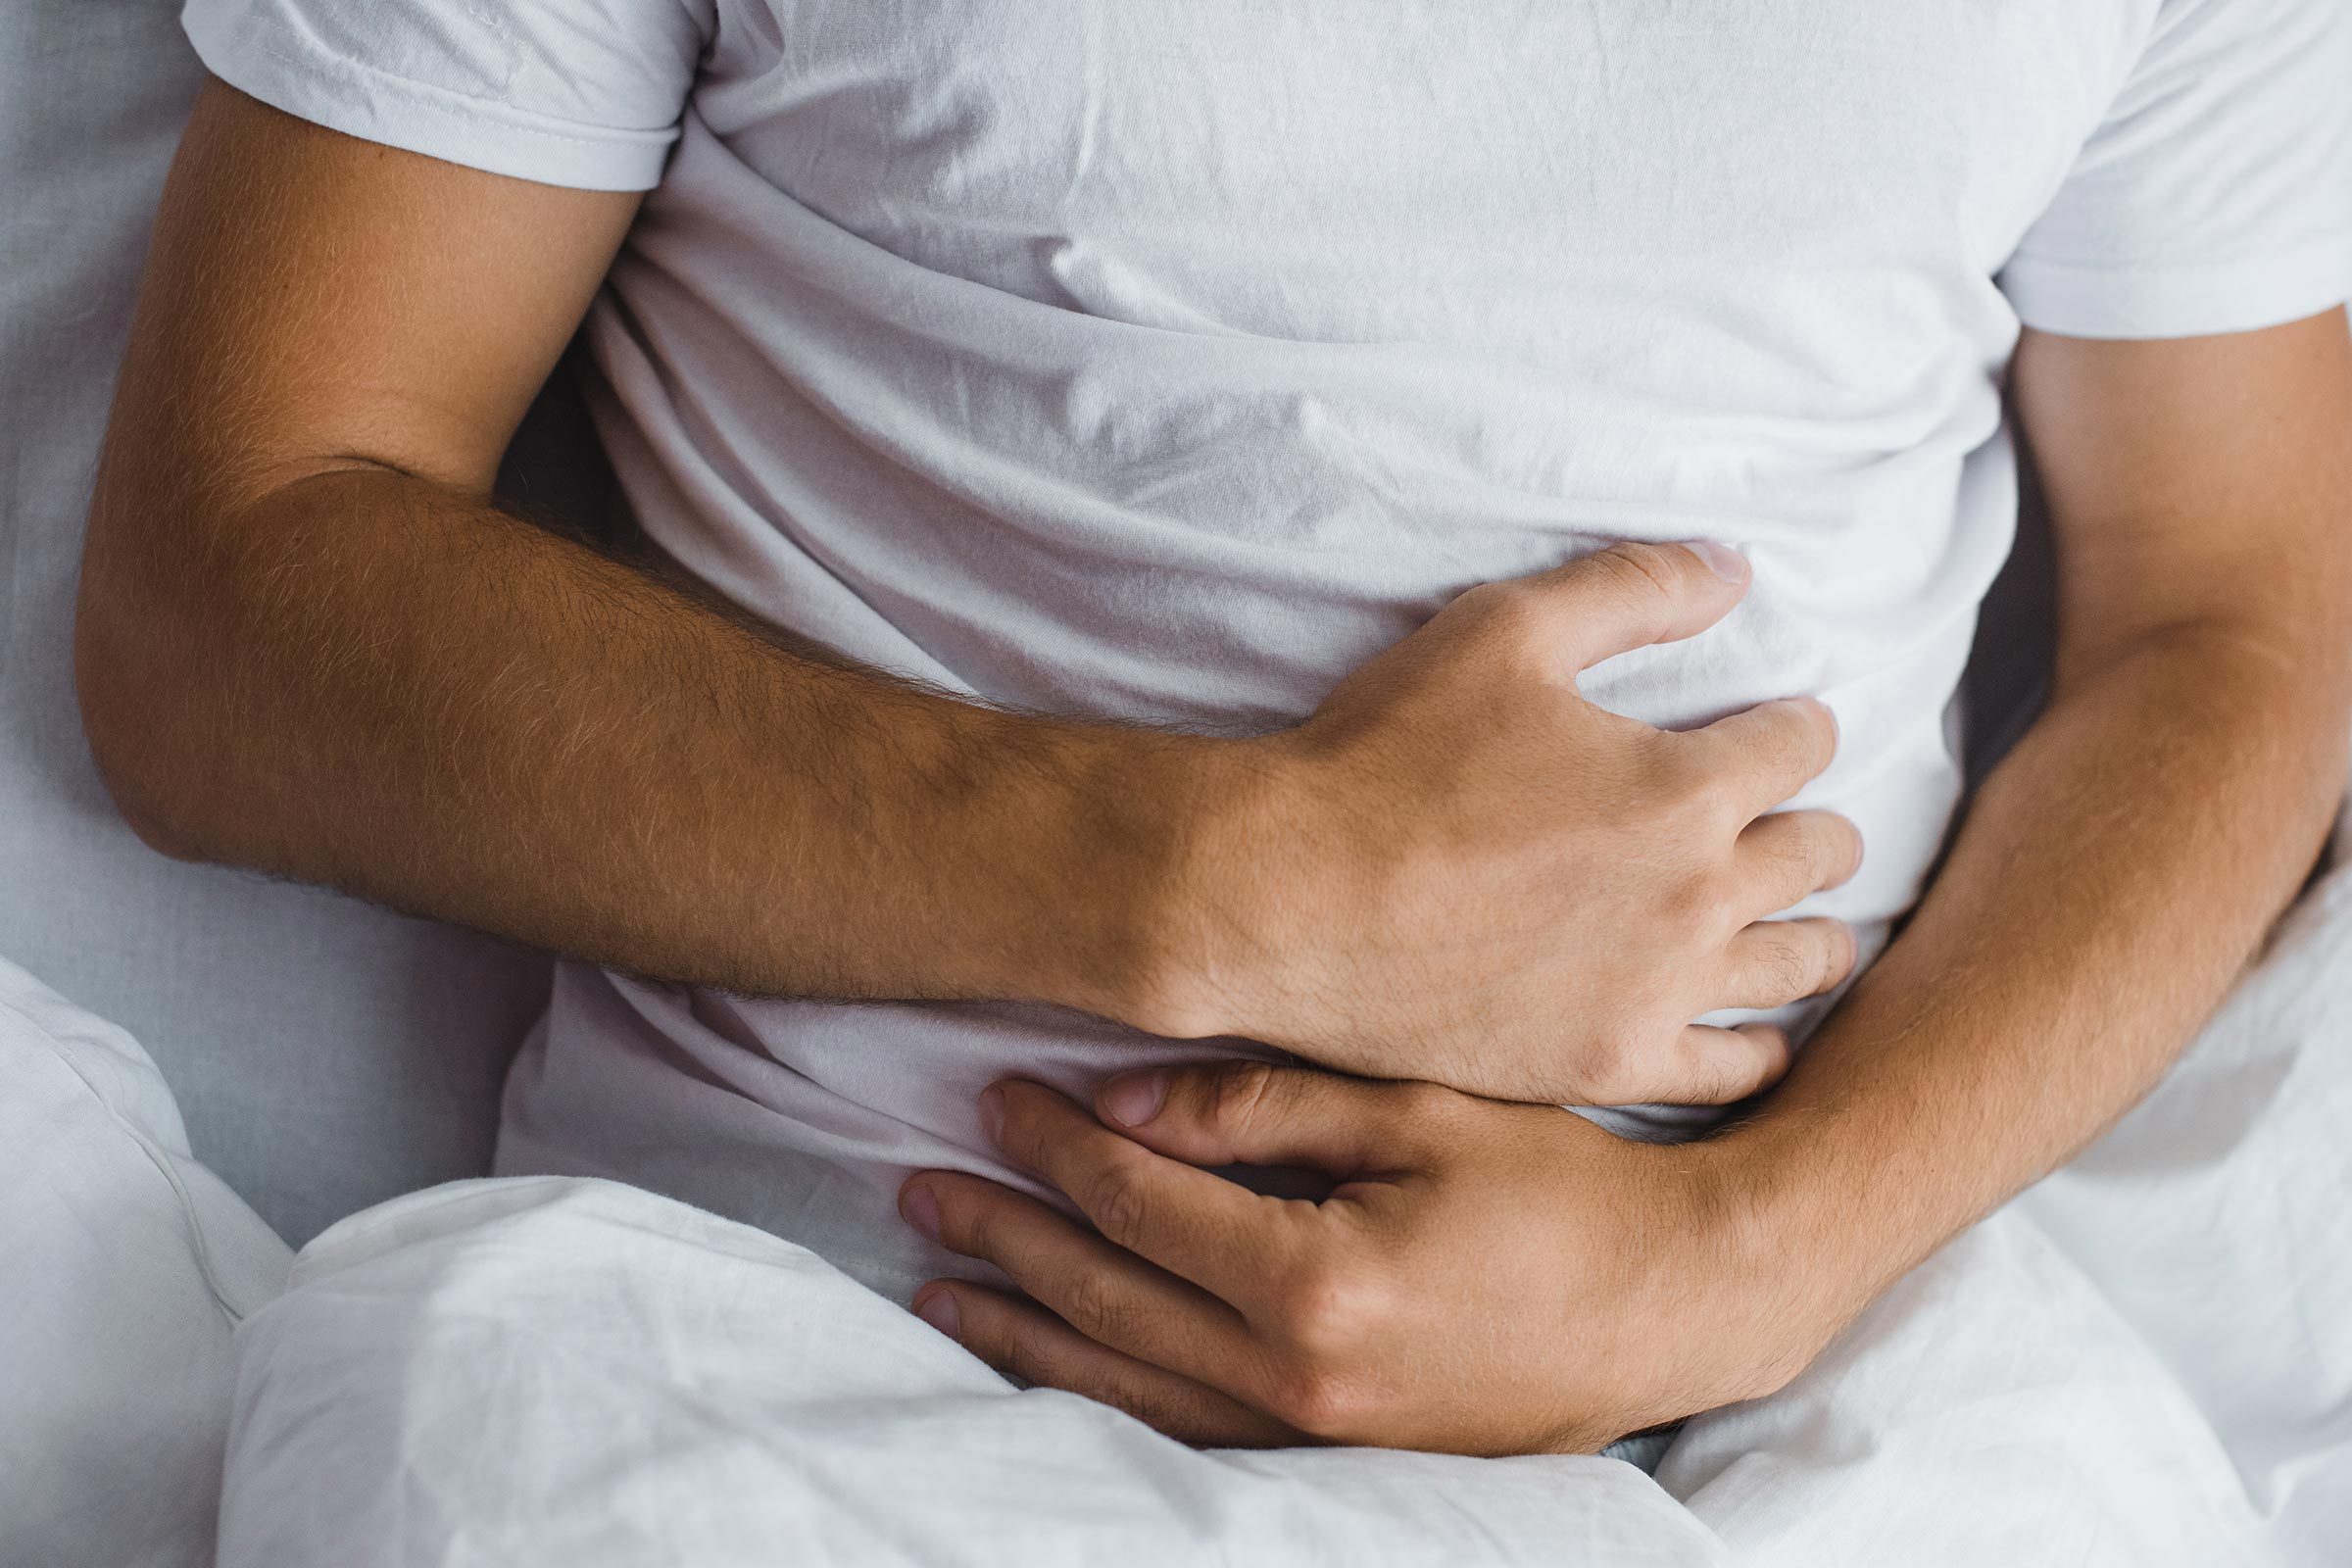 15 Signs Your Upper Abdominal Pain May Be an Emergency